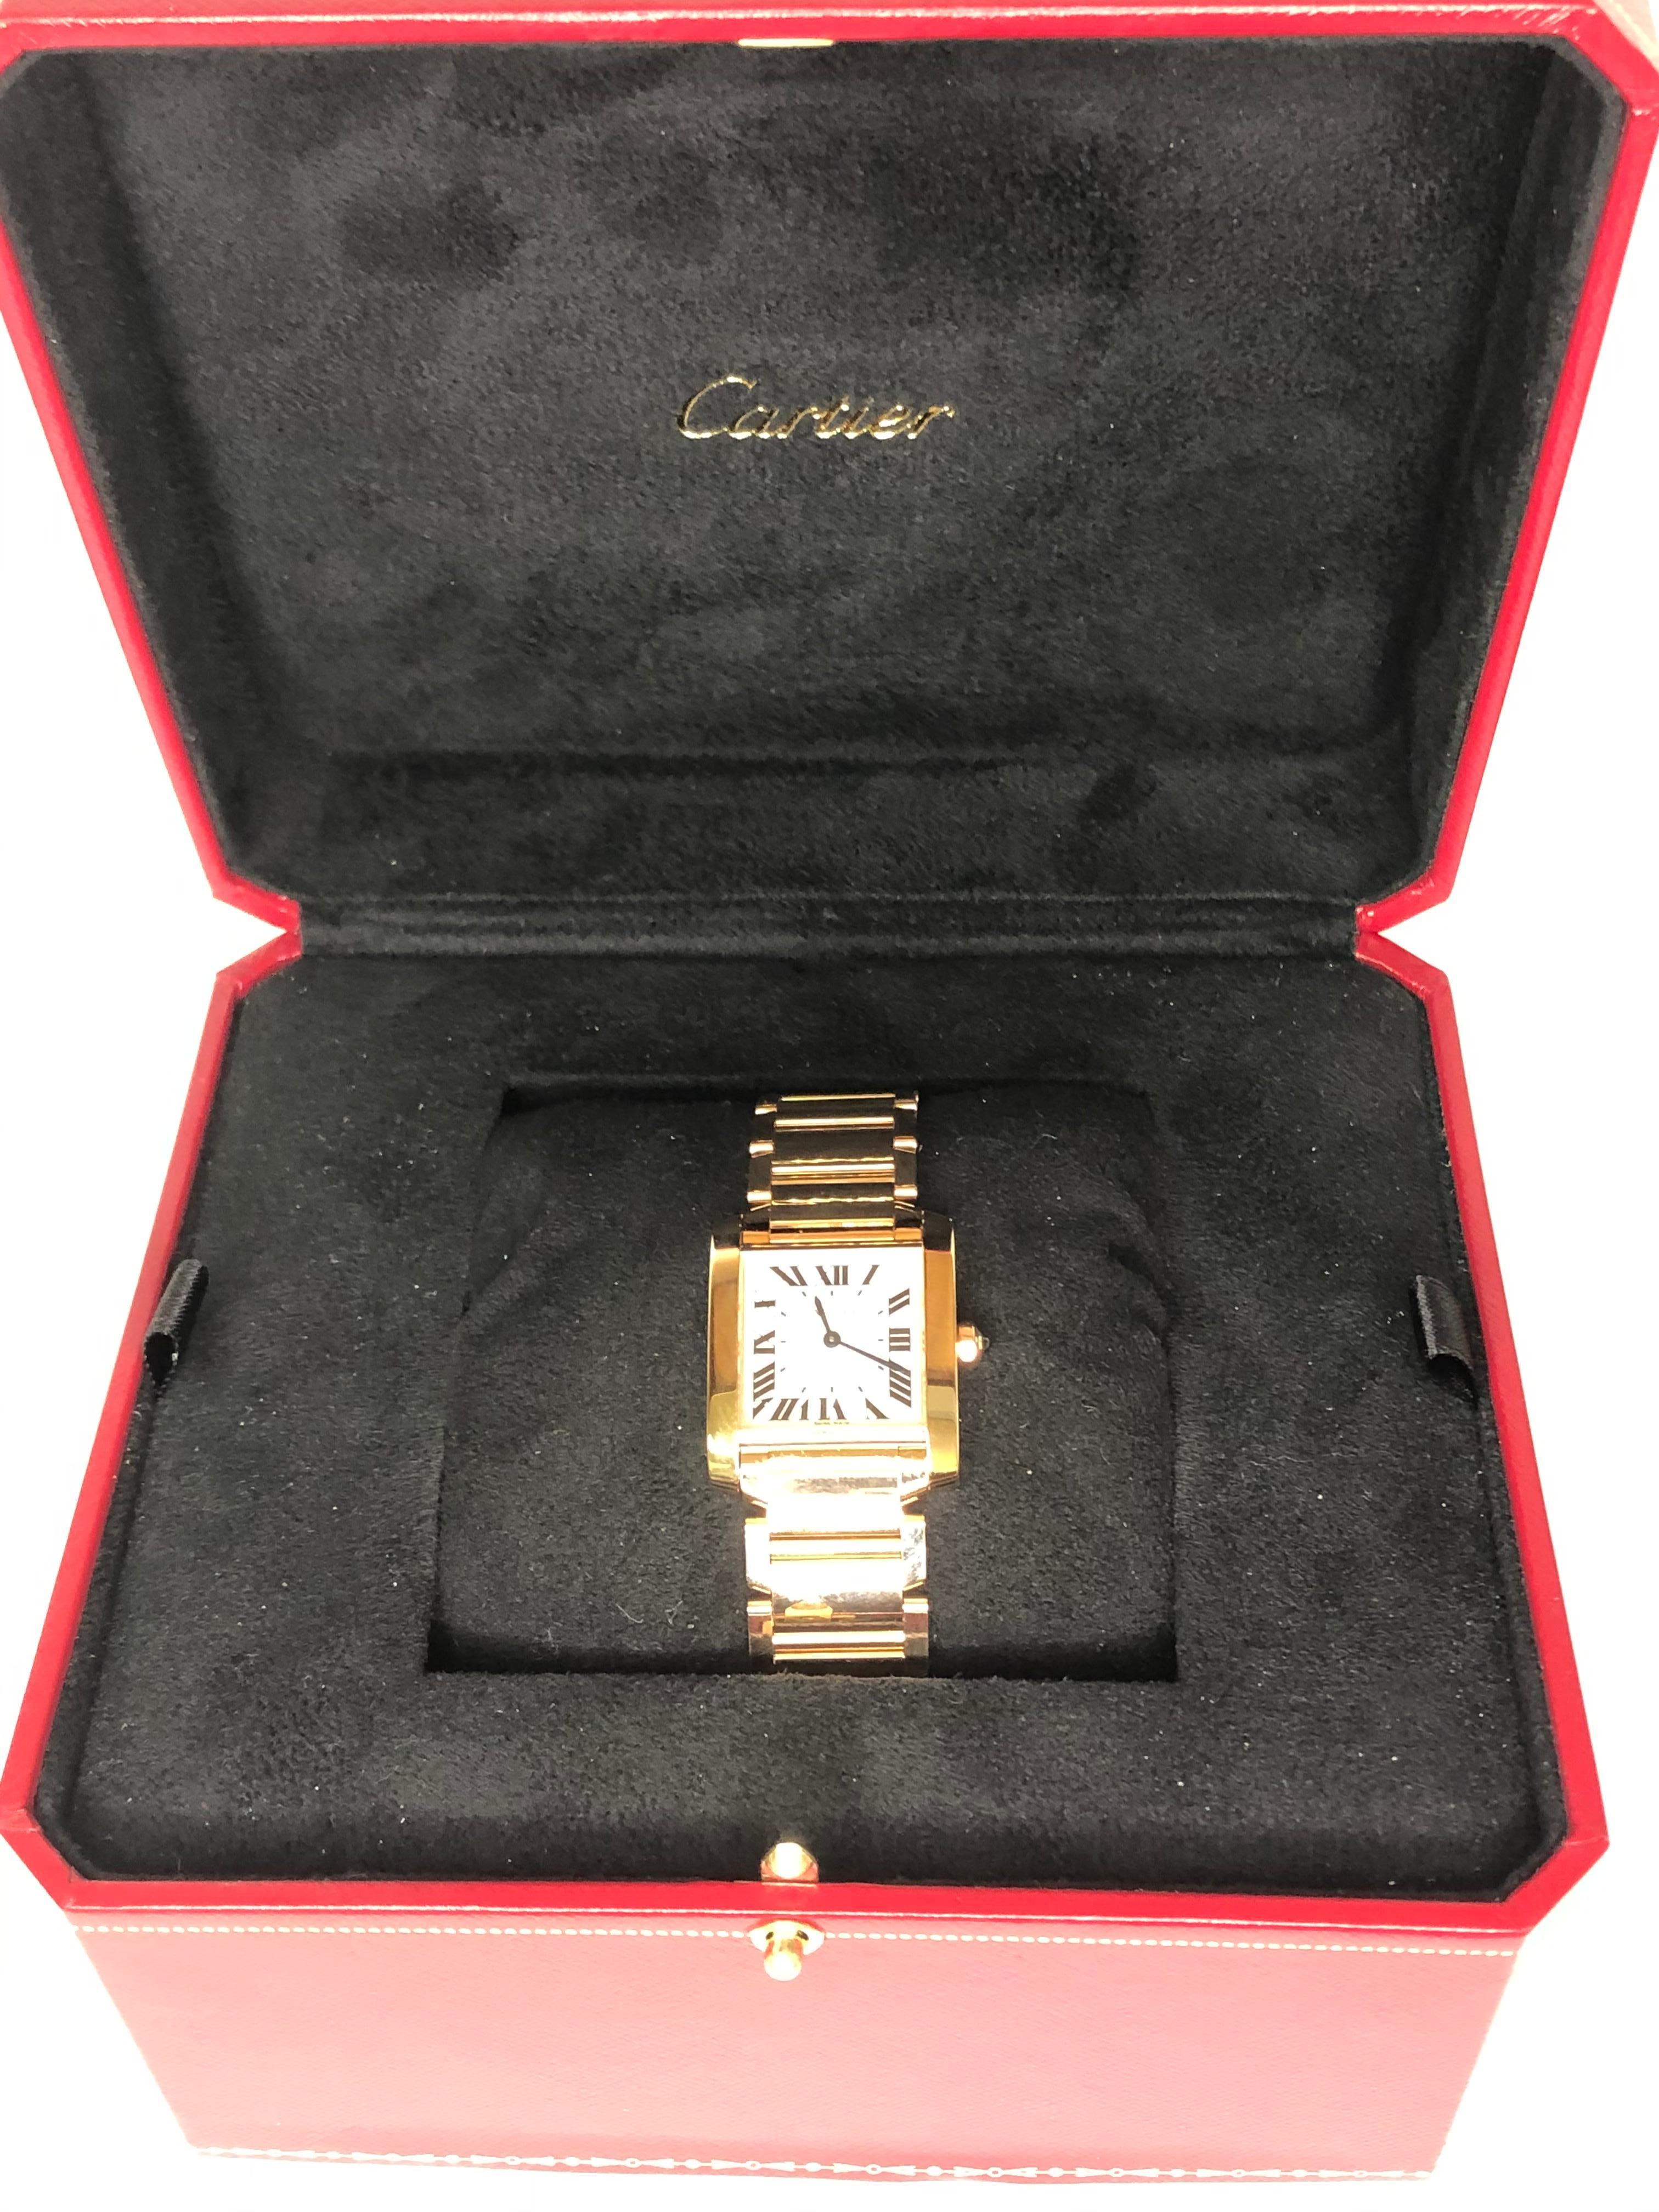 Cartier Watch Rose Gold Watch
Collection:  Tank Francaise
Size: Medium
Ref: WGTA0030
Previously owned but never worn.
18 karat rose gold.
Mother of pearl square face.
Three links that were removed are included.  Watch has never been worn.
Comes with